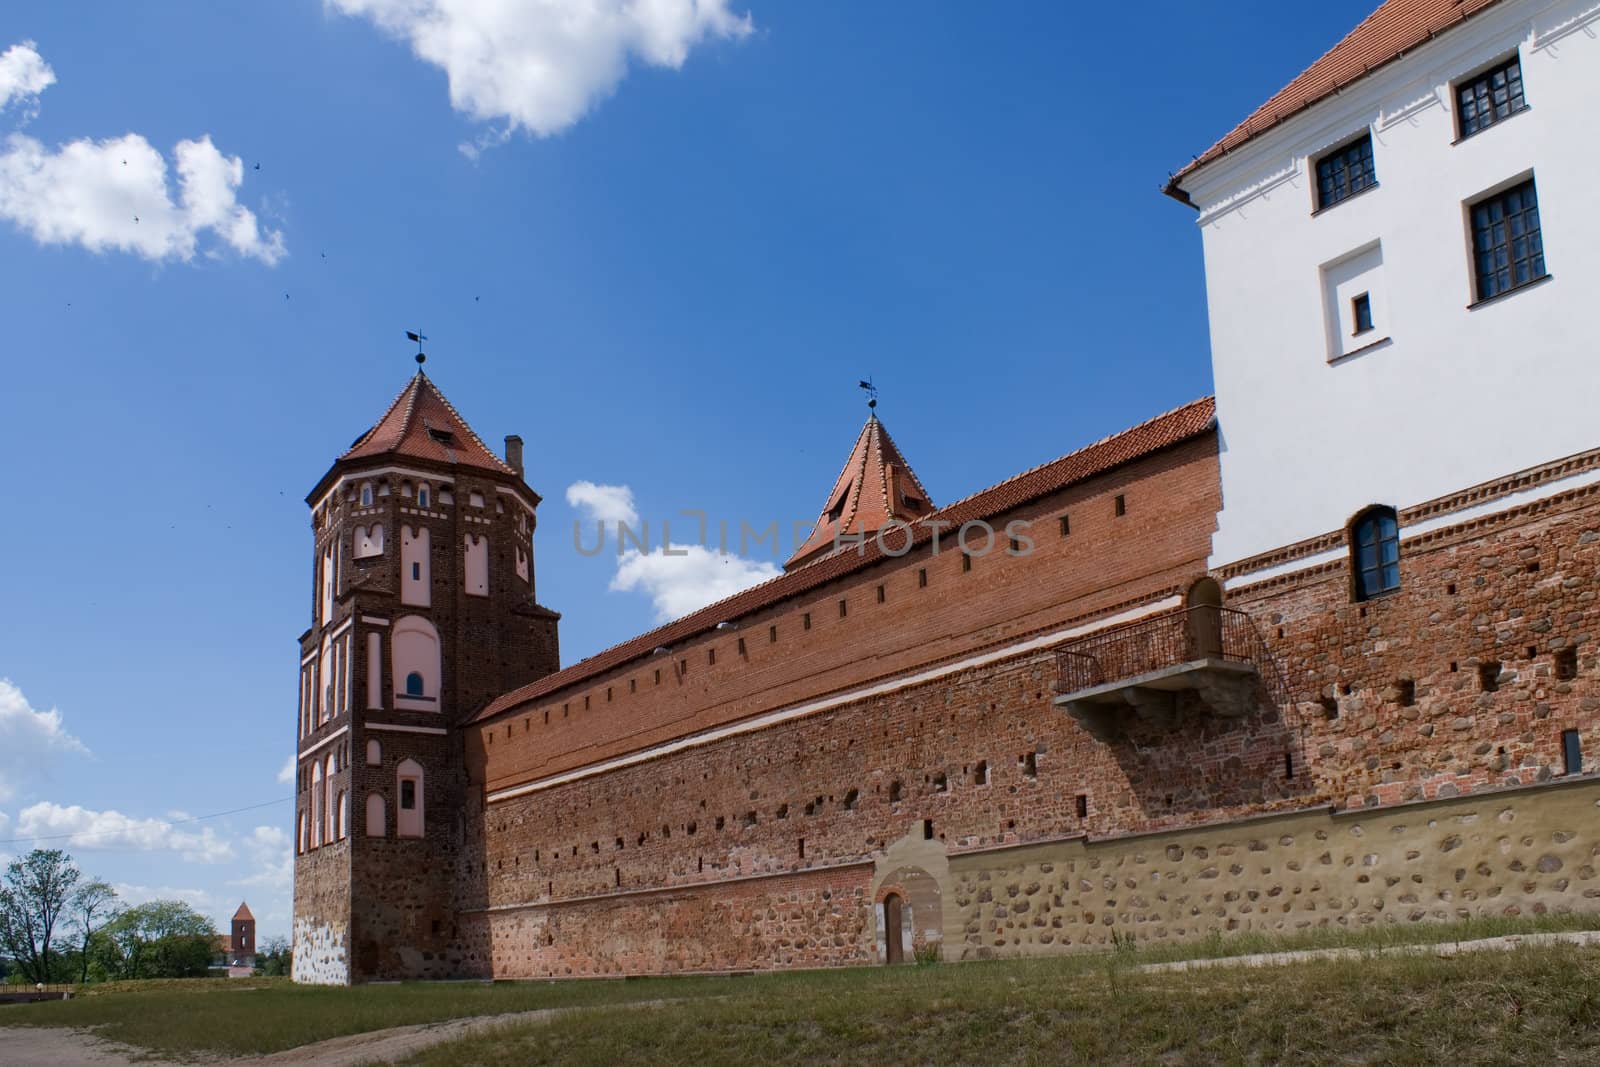 Tower and Wall with balcony of Mir Castle, Belarus